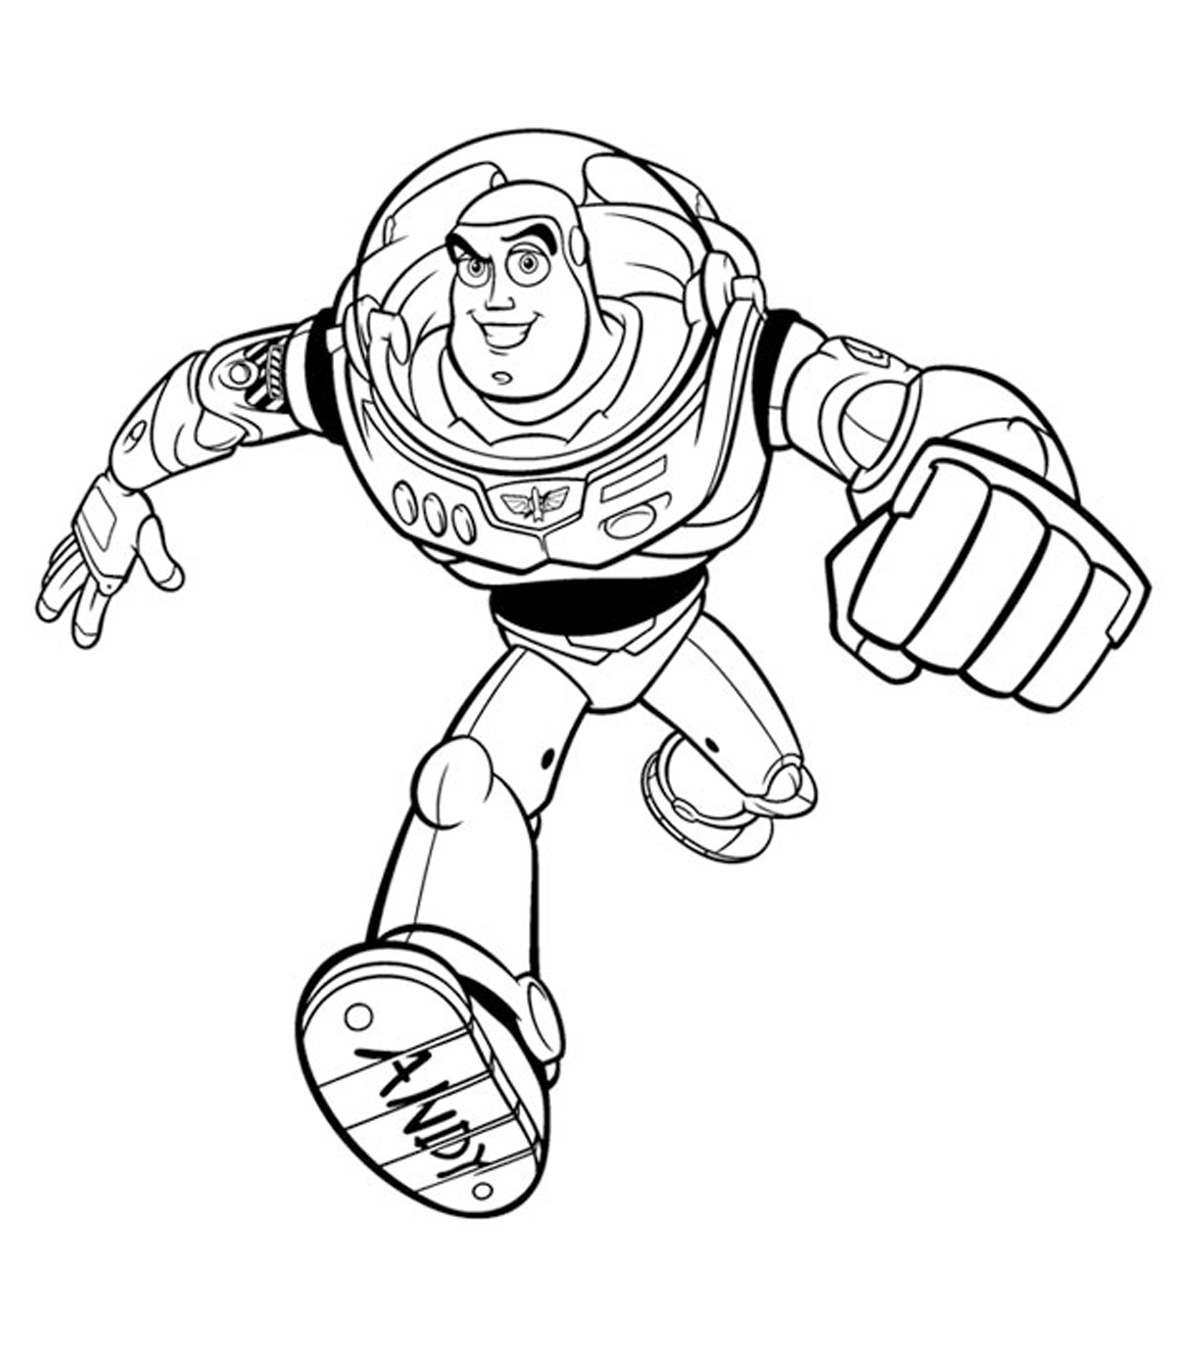 Top 20 Free Printable Toy Story Coloring Pages Online